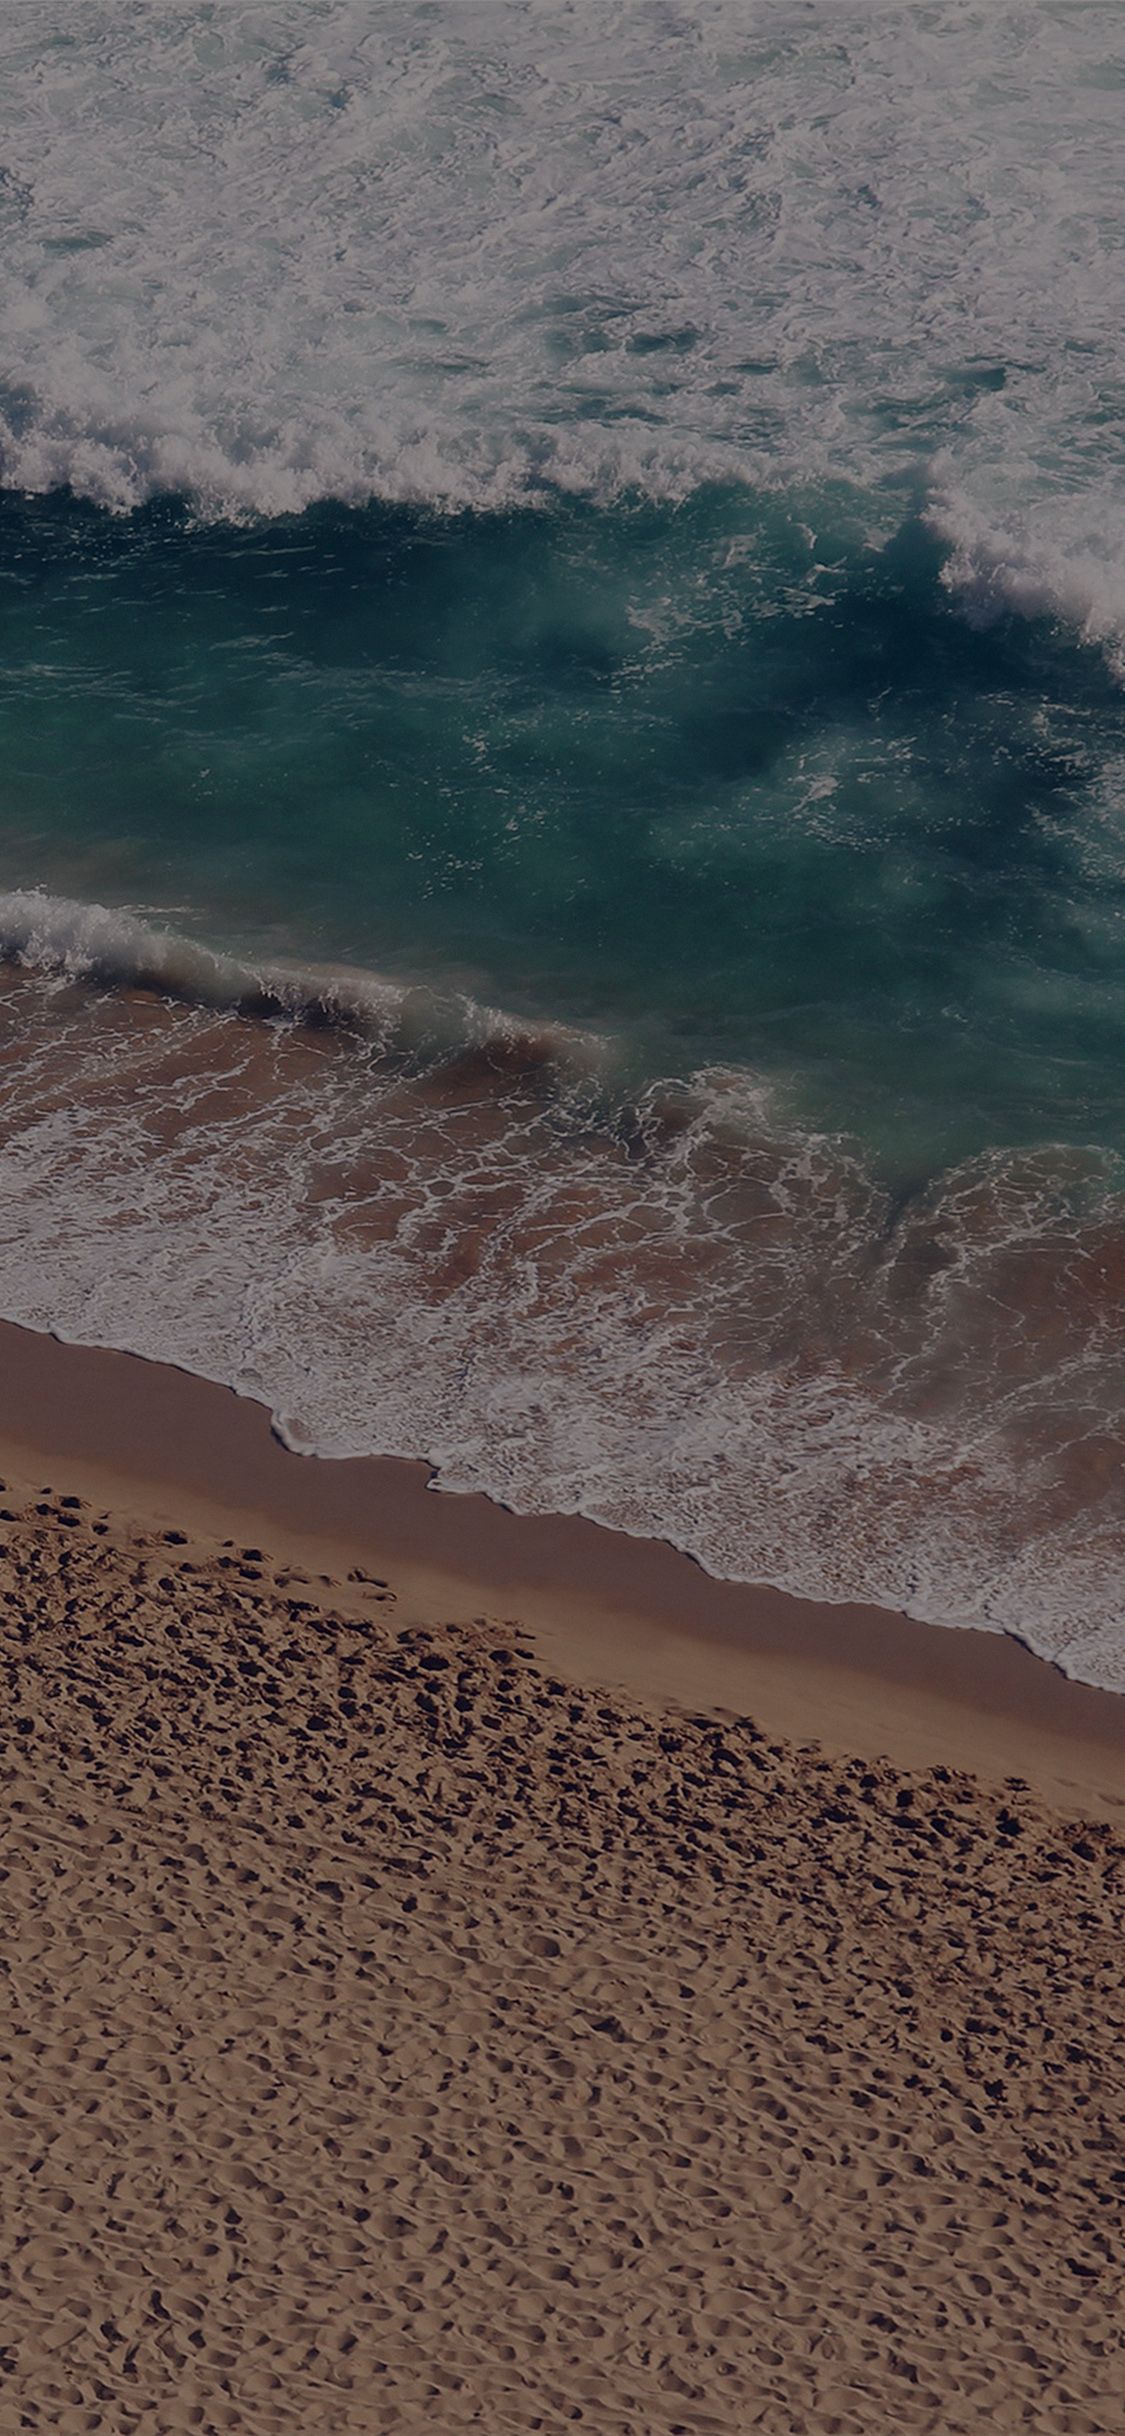 An aerial view of a sandy beach with a wave crashing on the shore - Coast